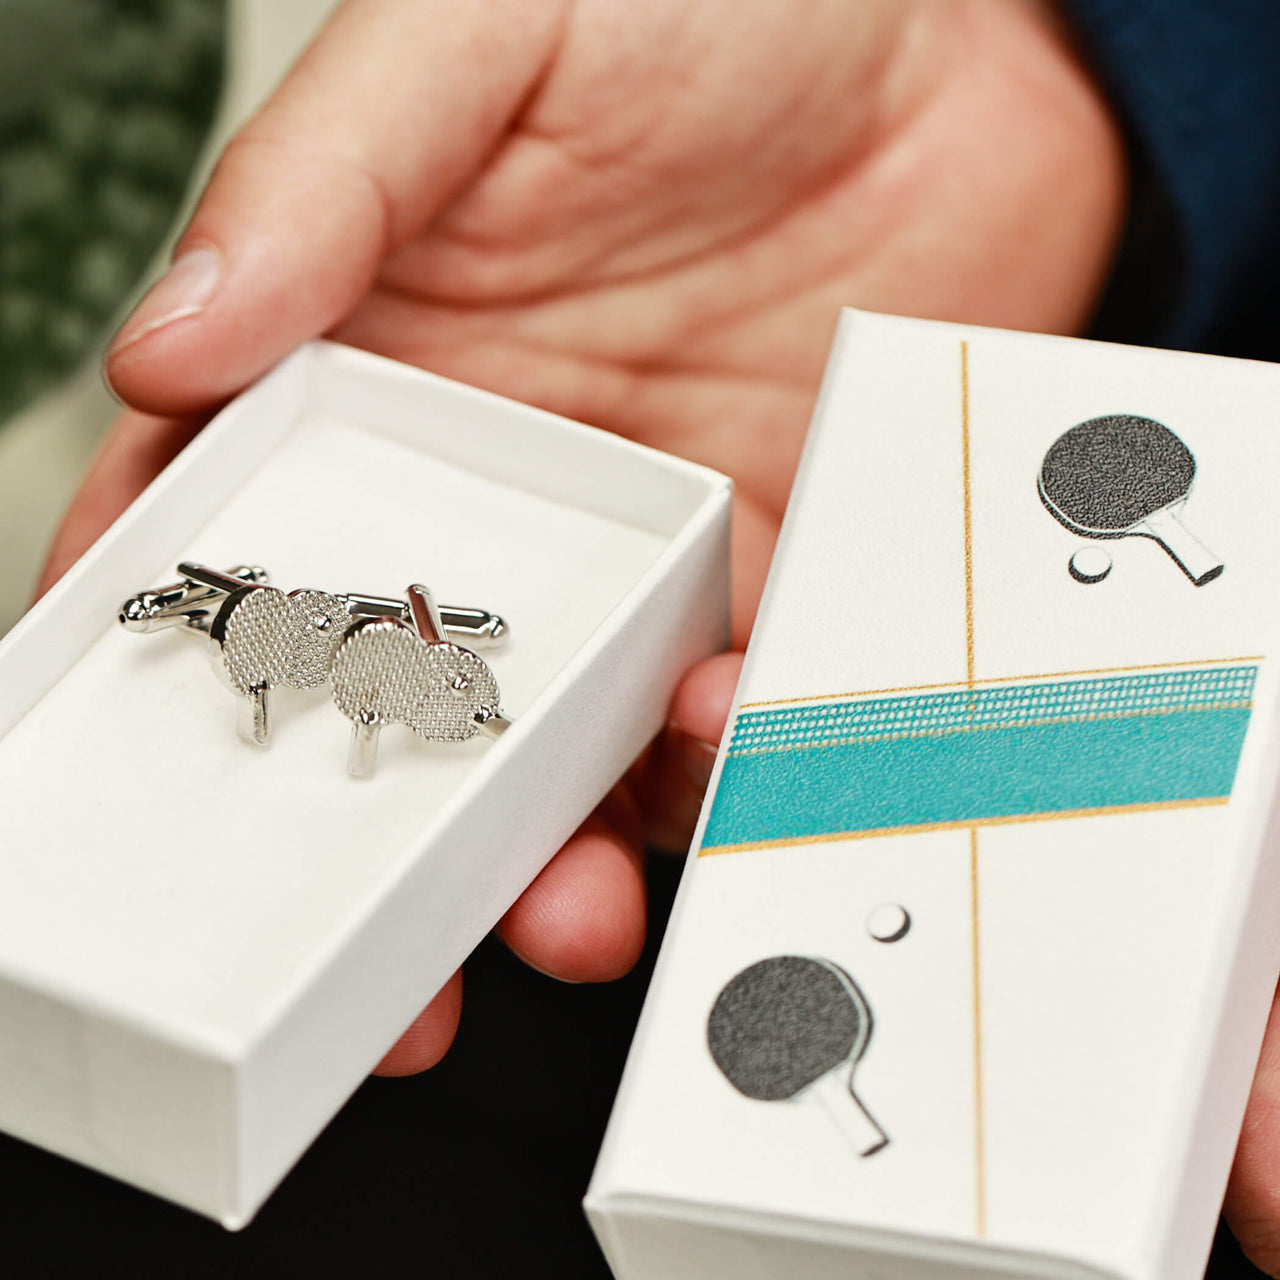 Playful Ping Pong Cufflinks In A Box